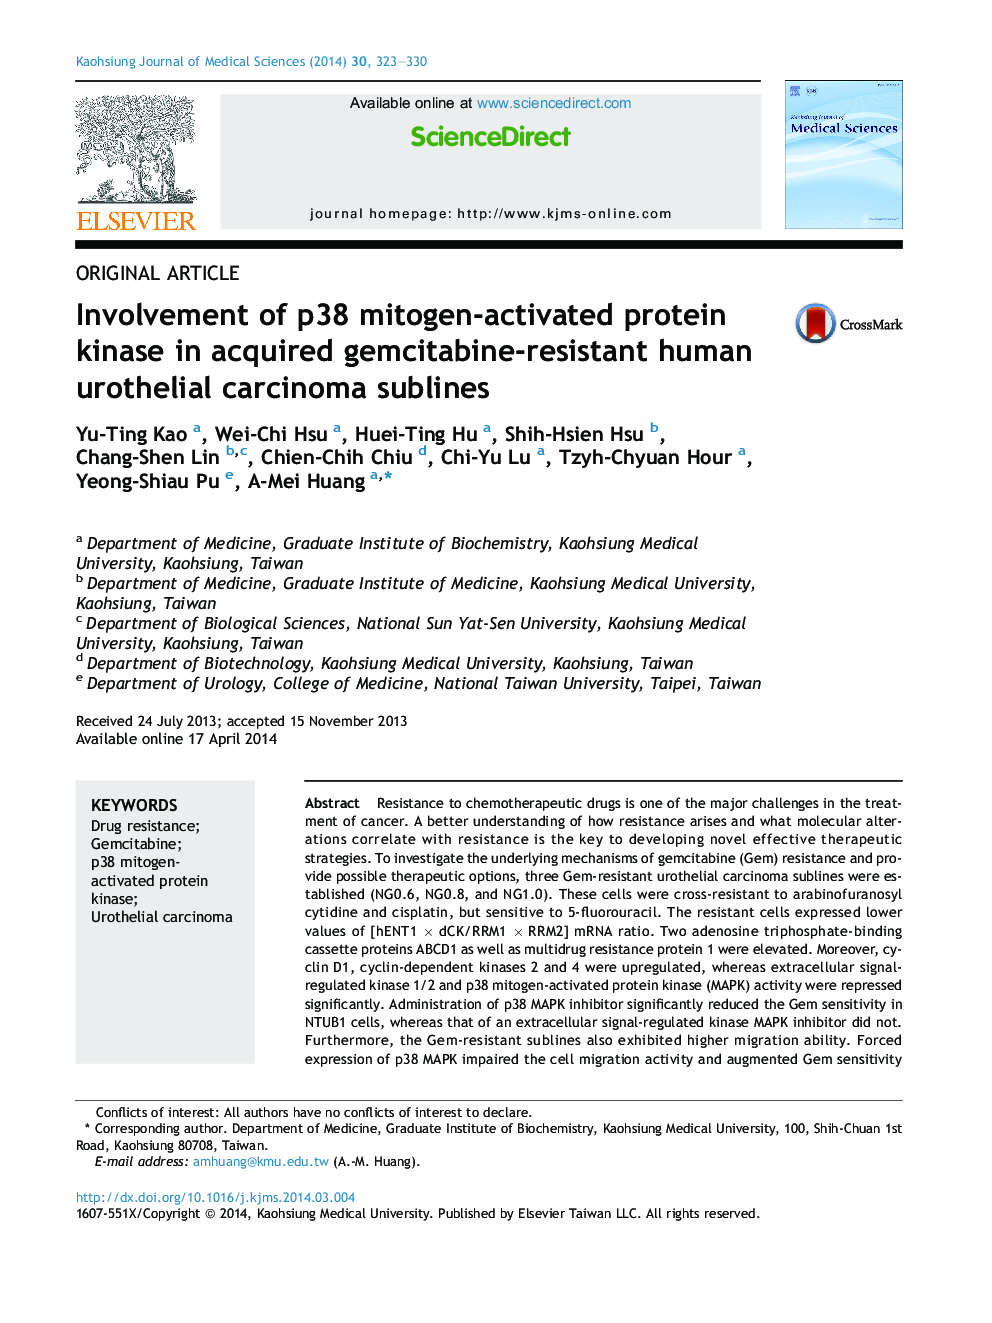 Involvement of p38 mitogen-activated protein kinase in acquired gemcitabine-resistant human urothelial carcinoma sublines 